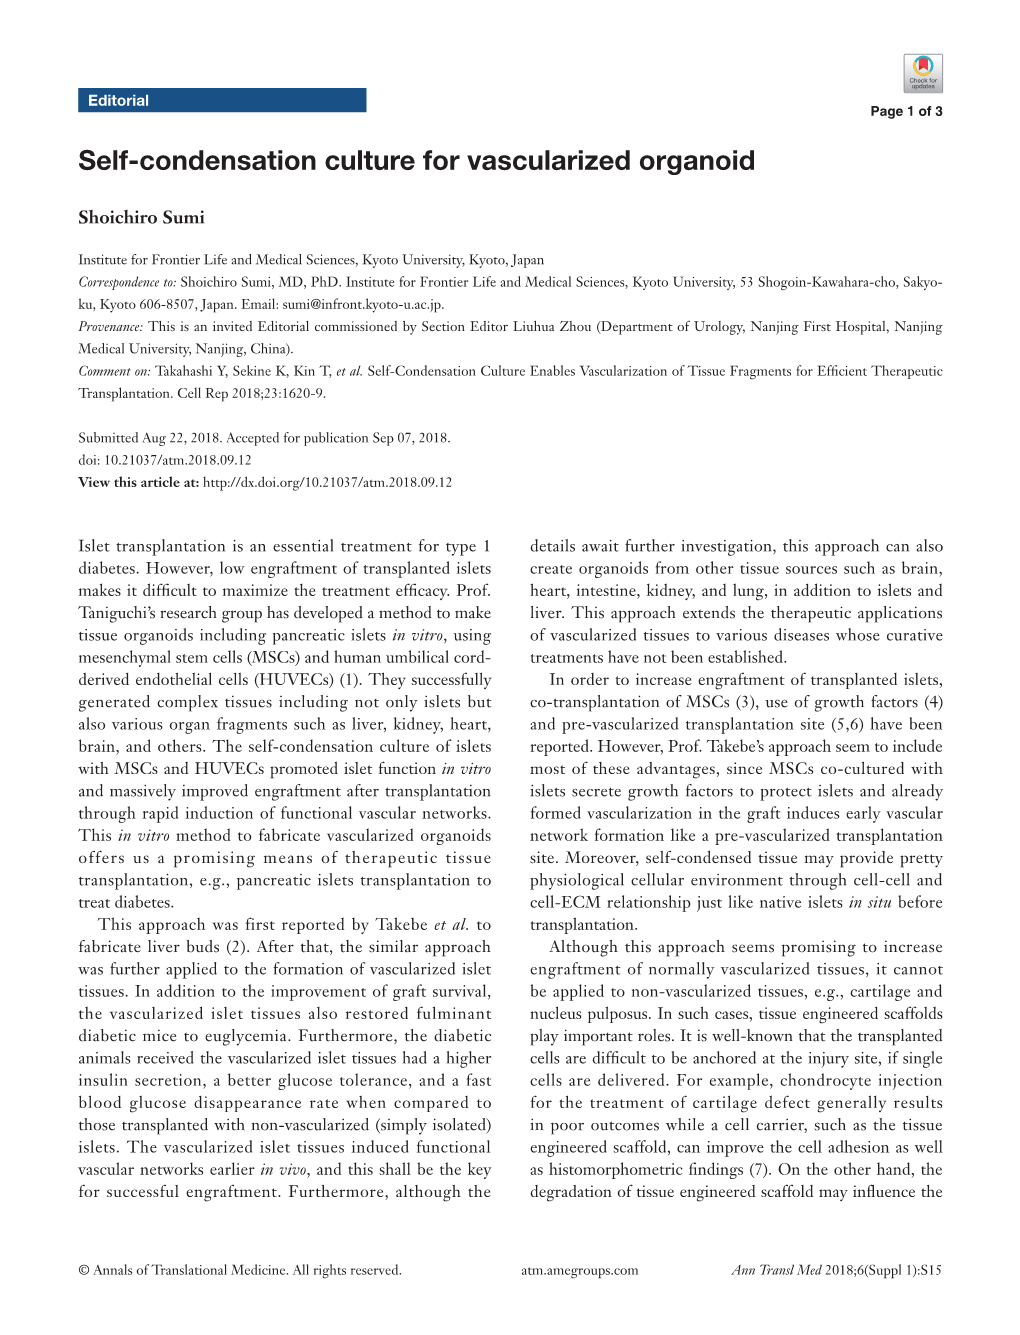 Self-Condensation Culture for Vascularized Organoid